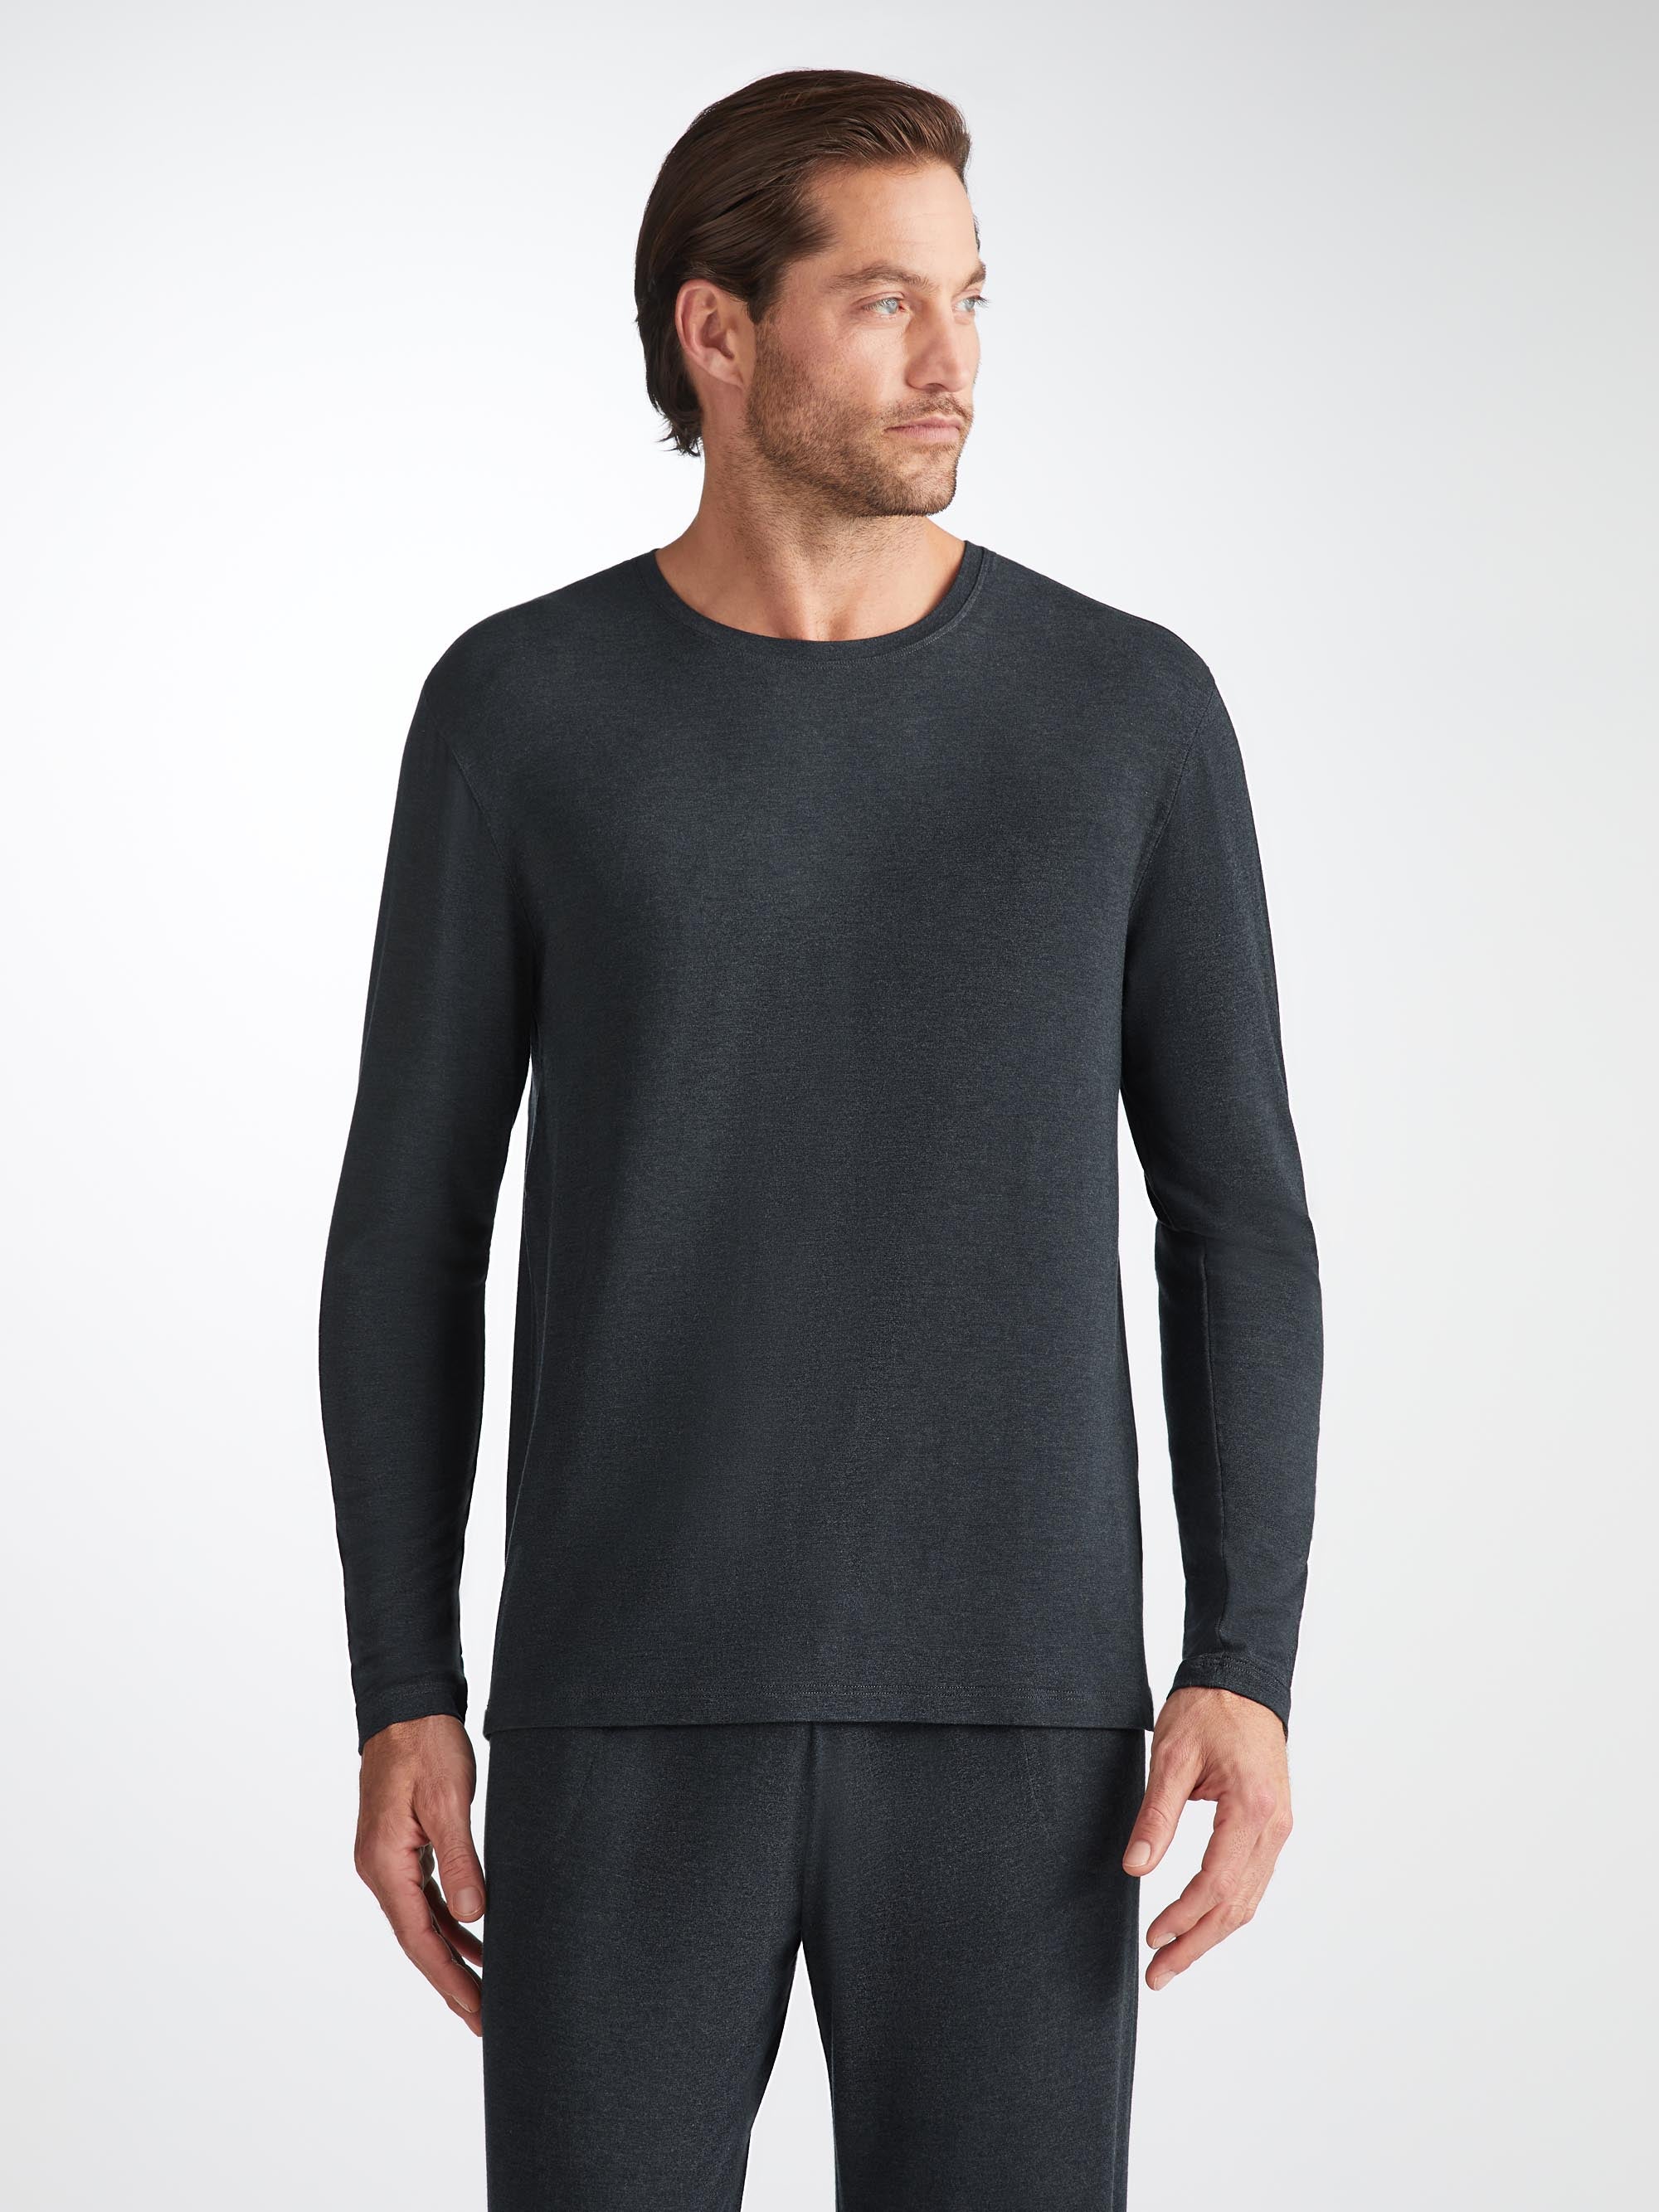 Men's Long Sleeve T-Shirt Marlowe Micro Modal Stretch Anthracite